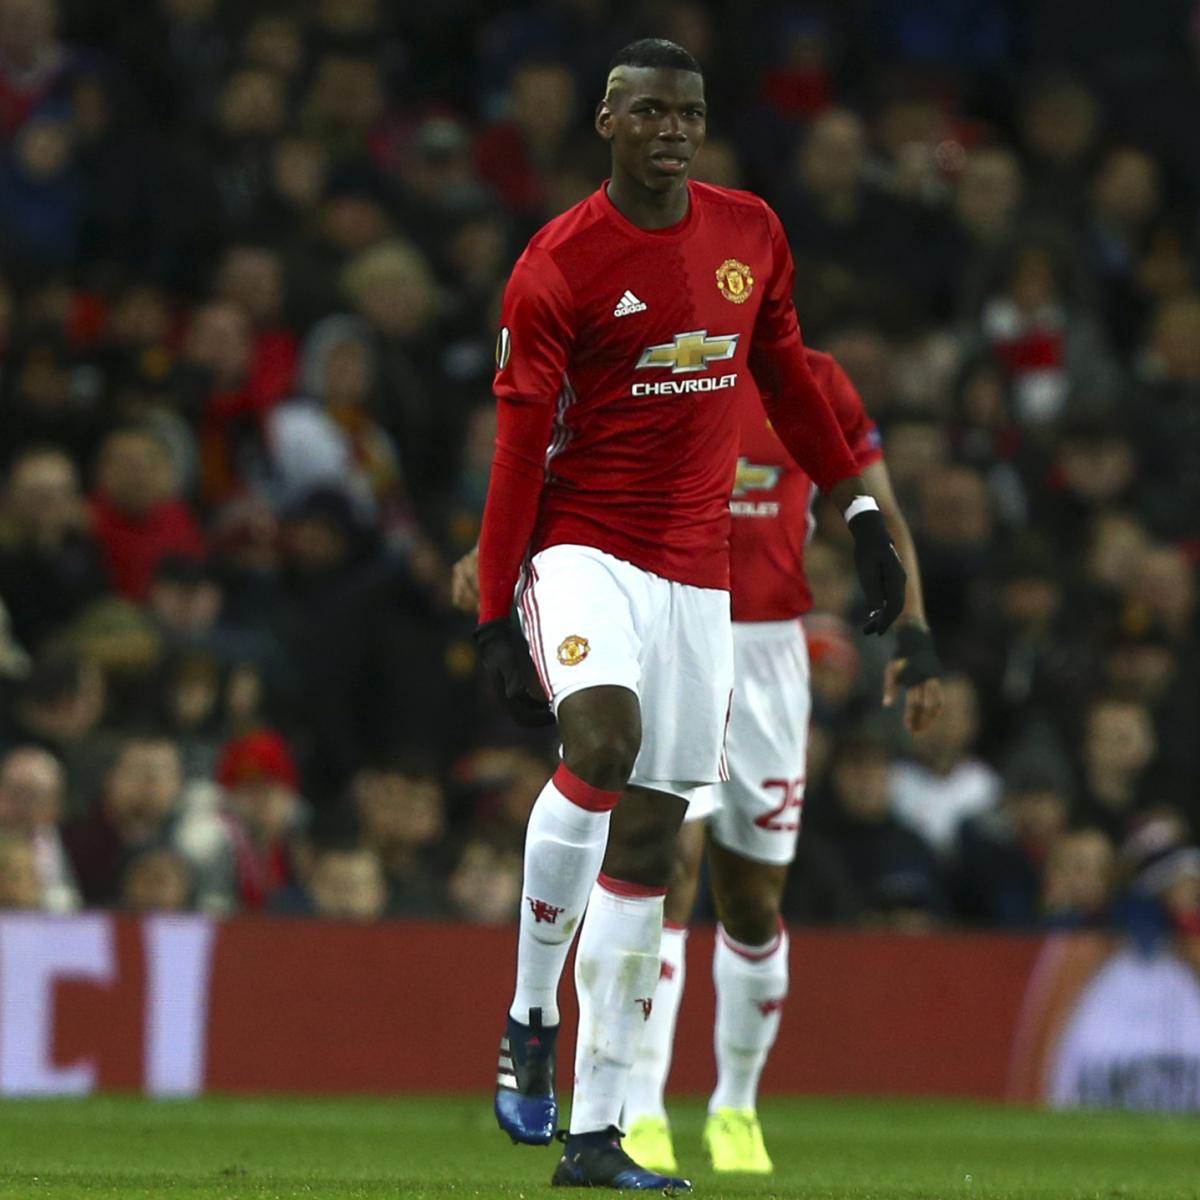 Examining Manchester United S Midfield Options In The Absence Of Paul Pogba News Scores